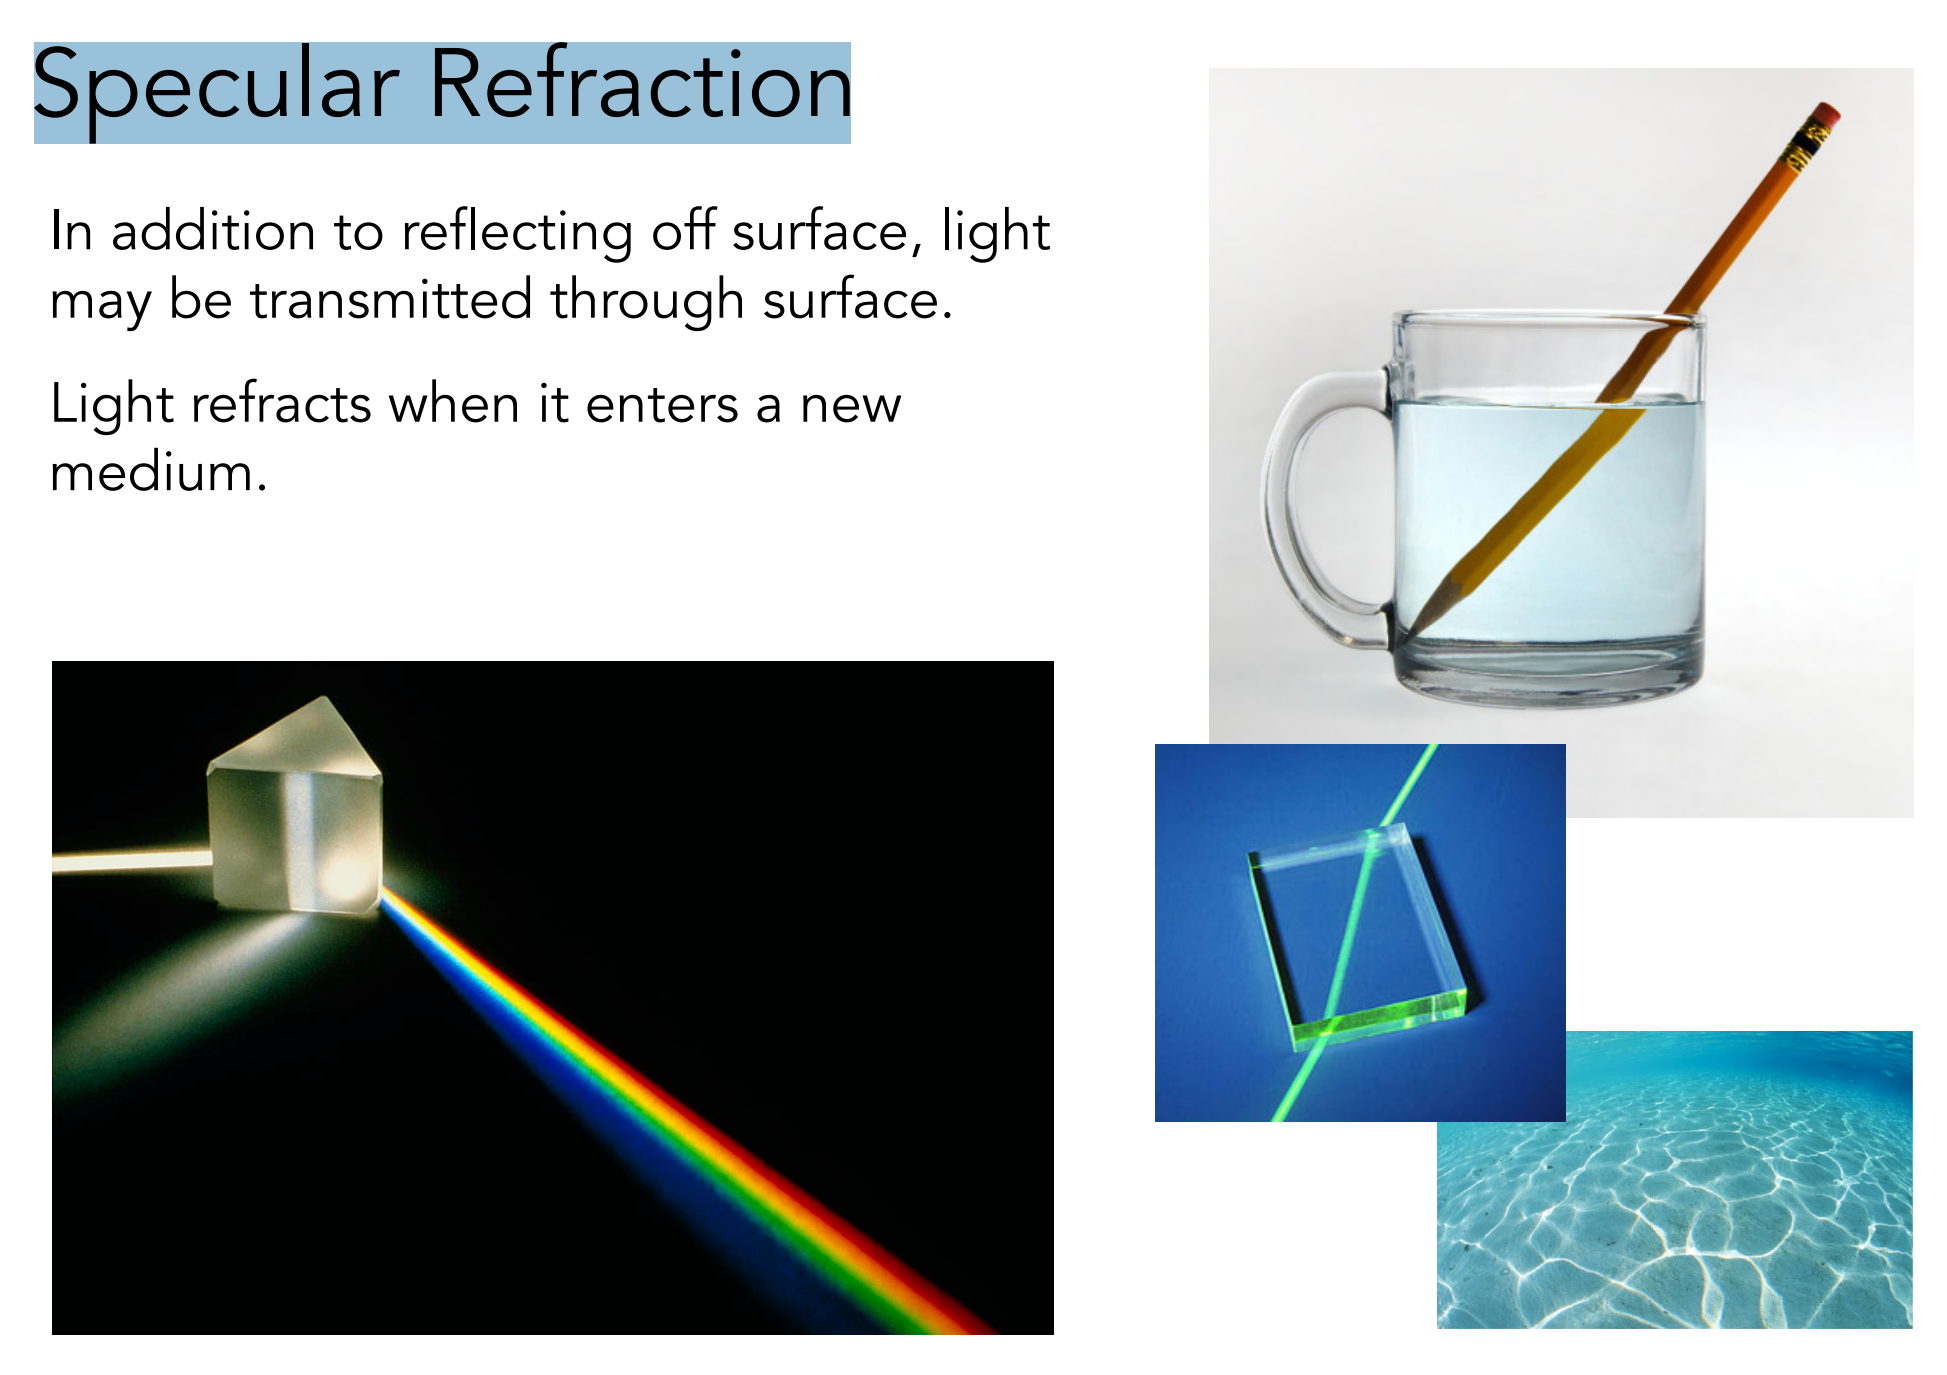 Specular Refraction